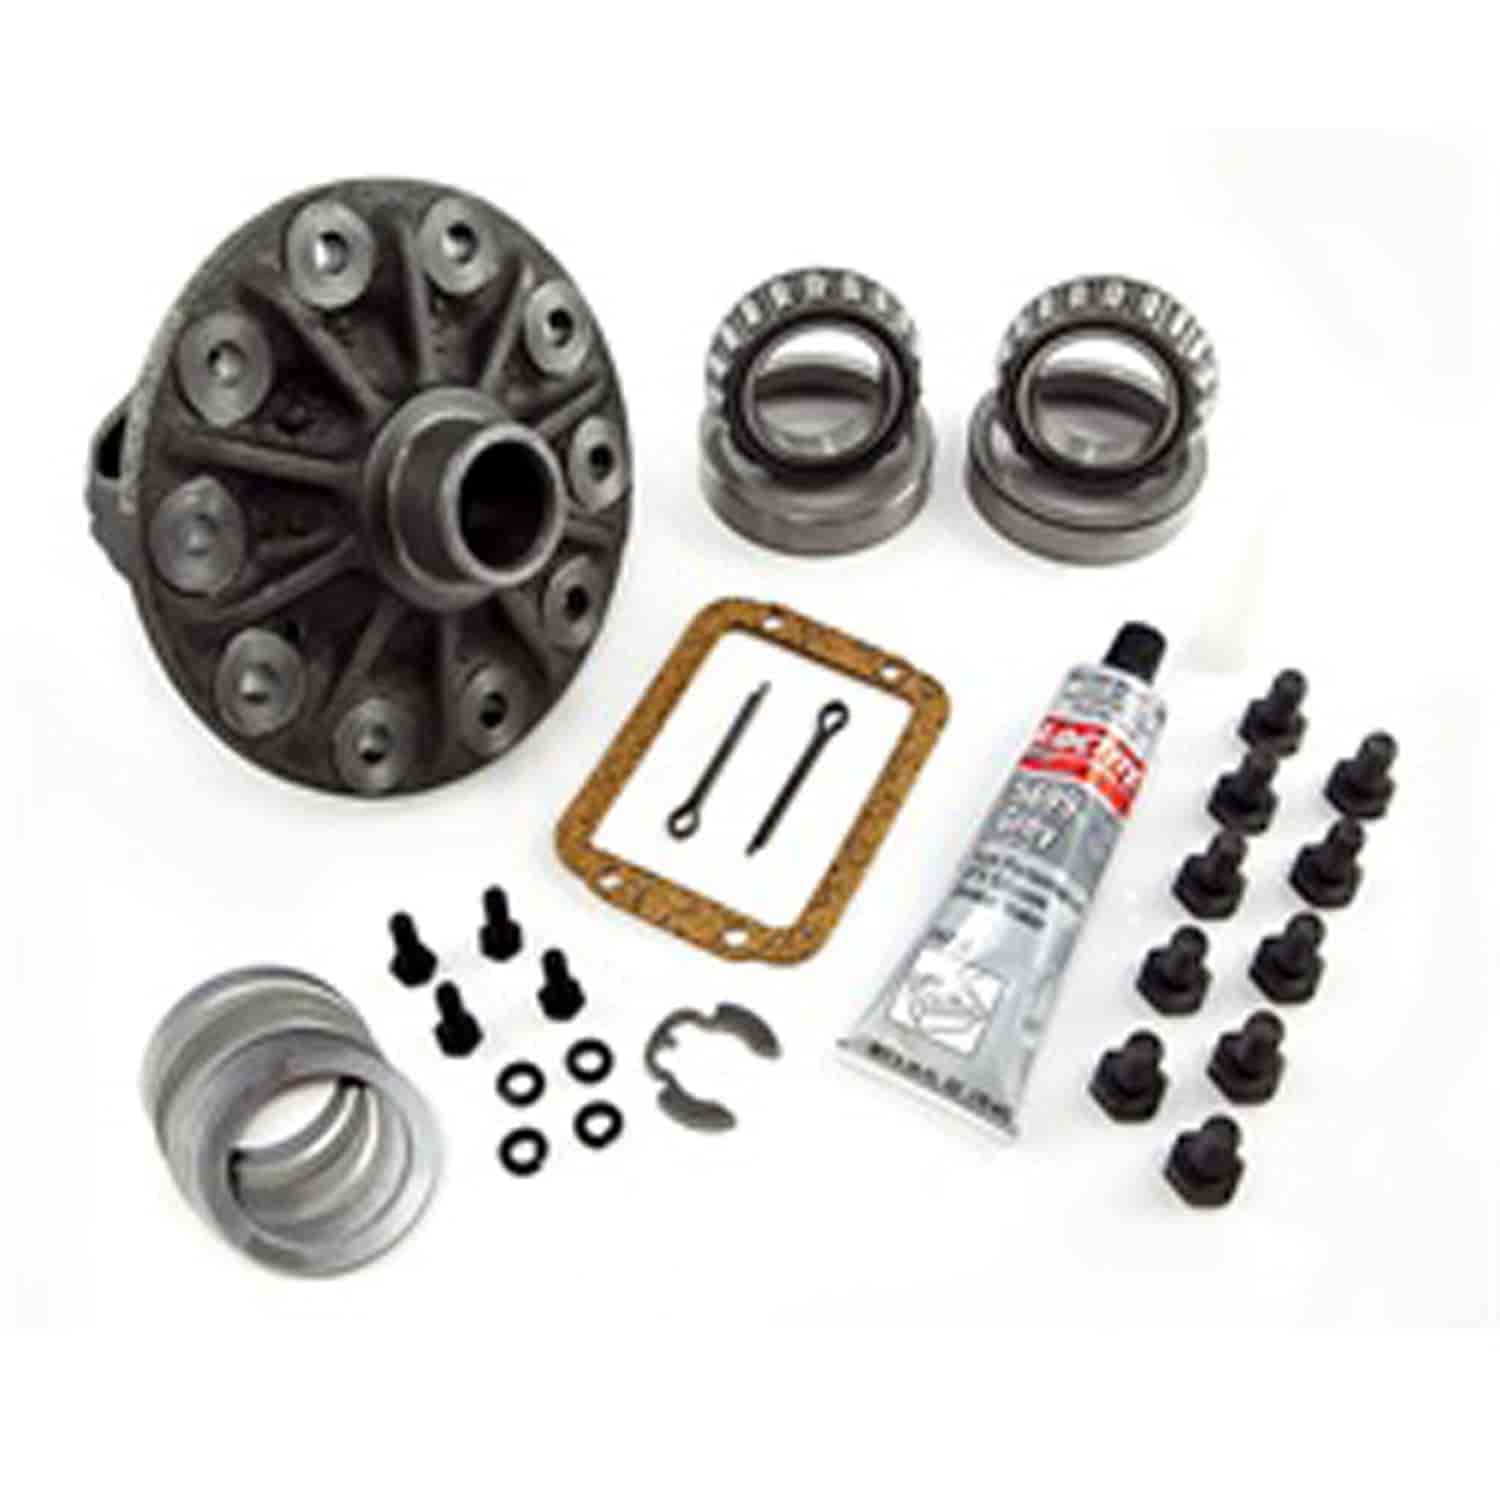 This standard differential case assembly kit from Omix-ADA fits for Dana 30 w/ Disconnect 3.07 to 3.55 Ratio